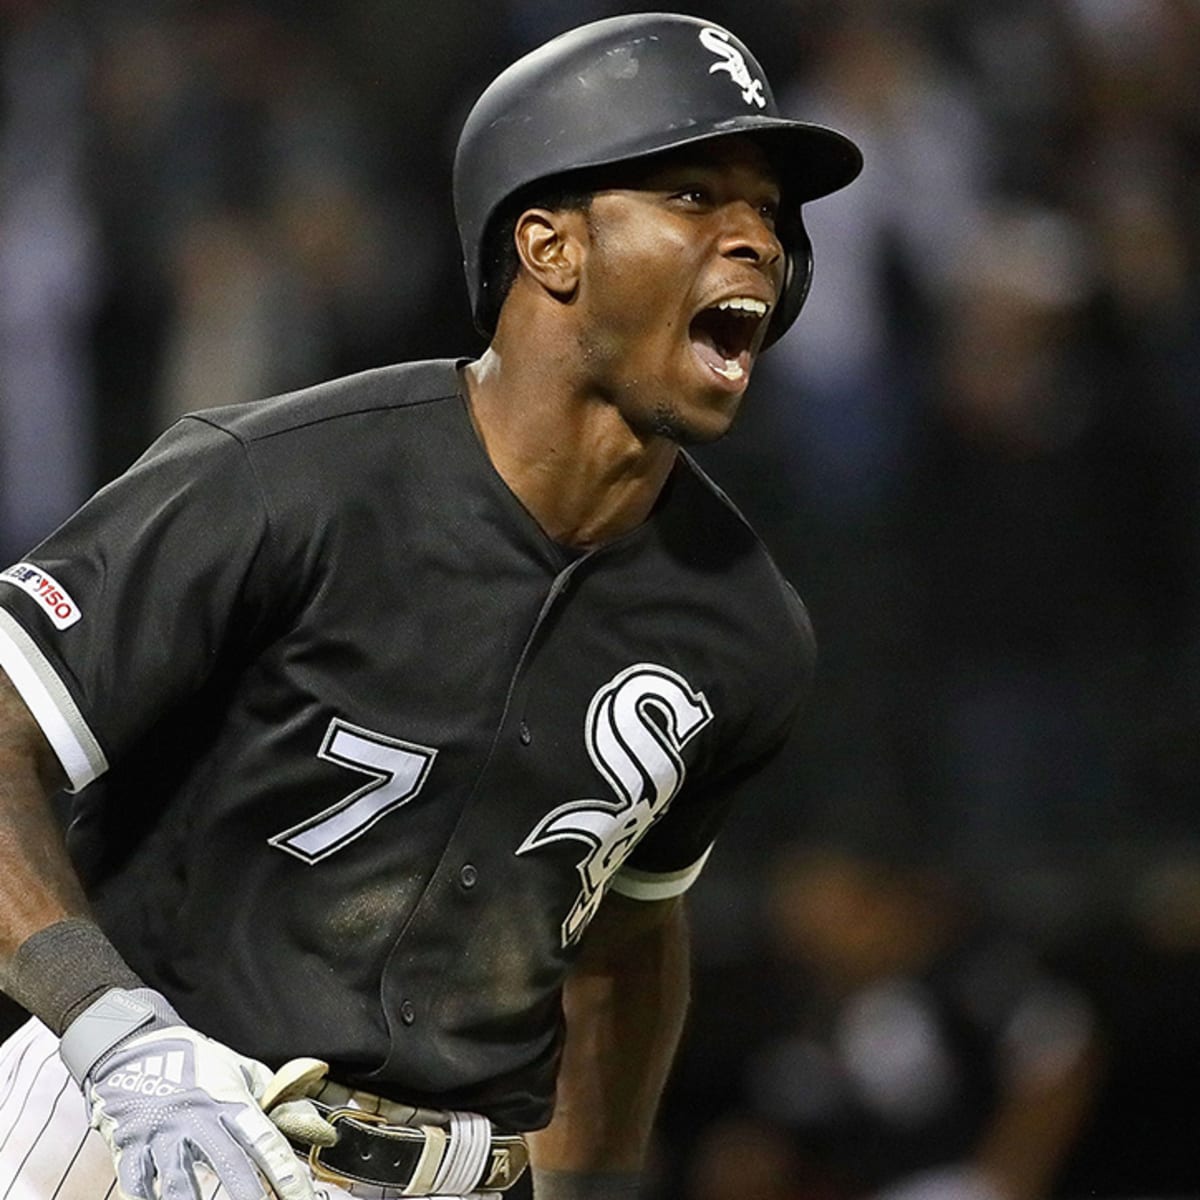 Why the Chicago White Sox are MLB's most interesting (and best